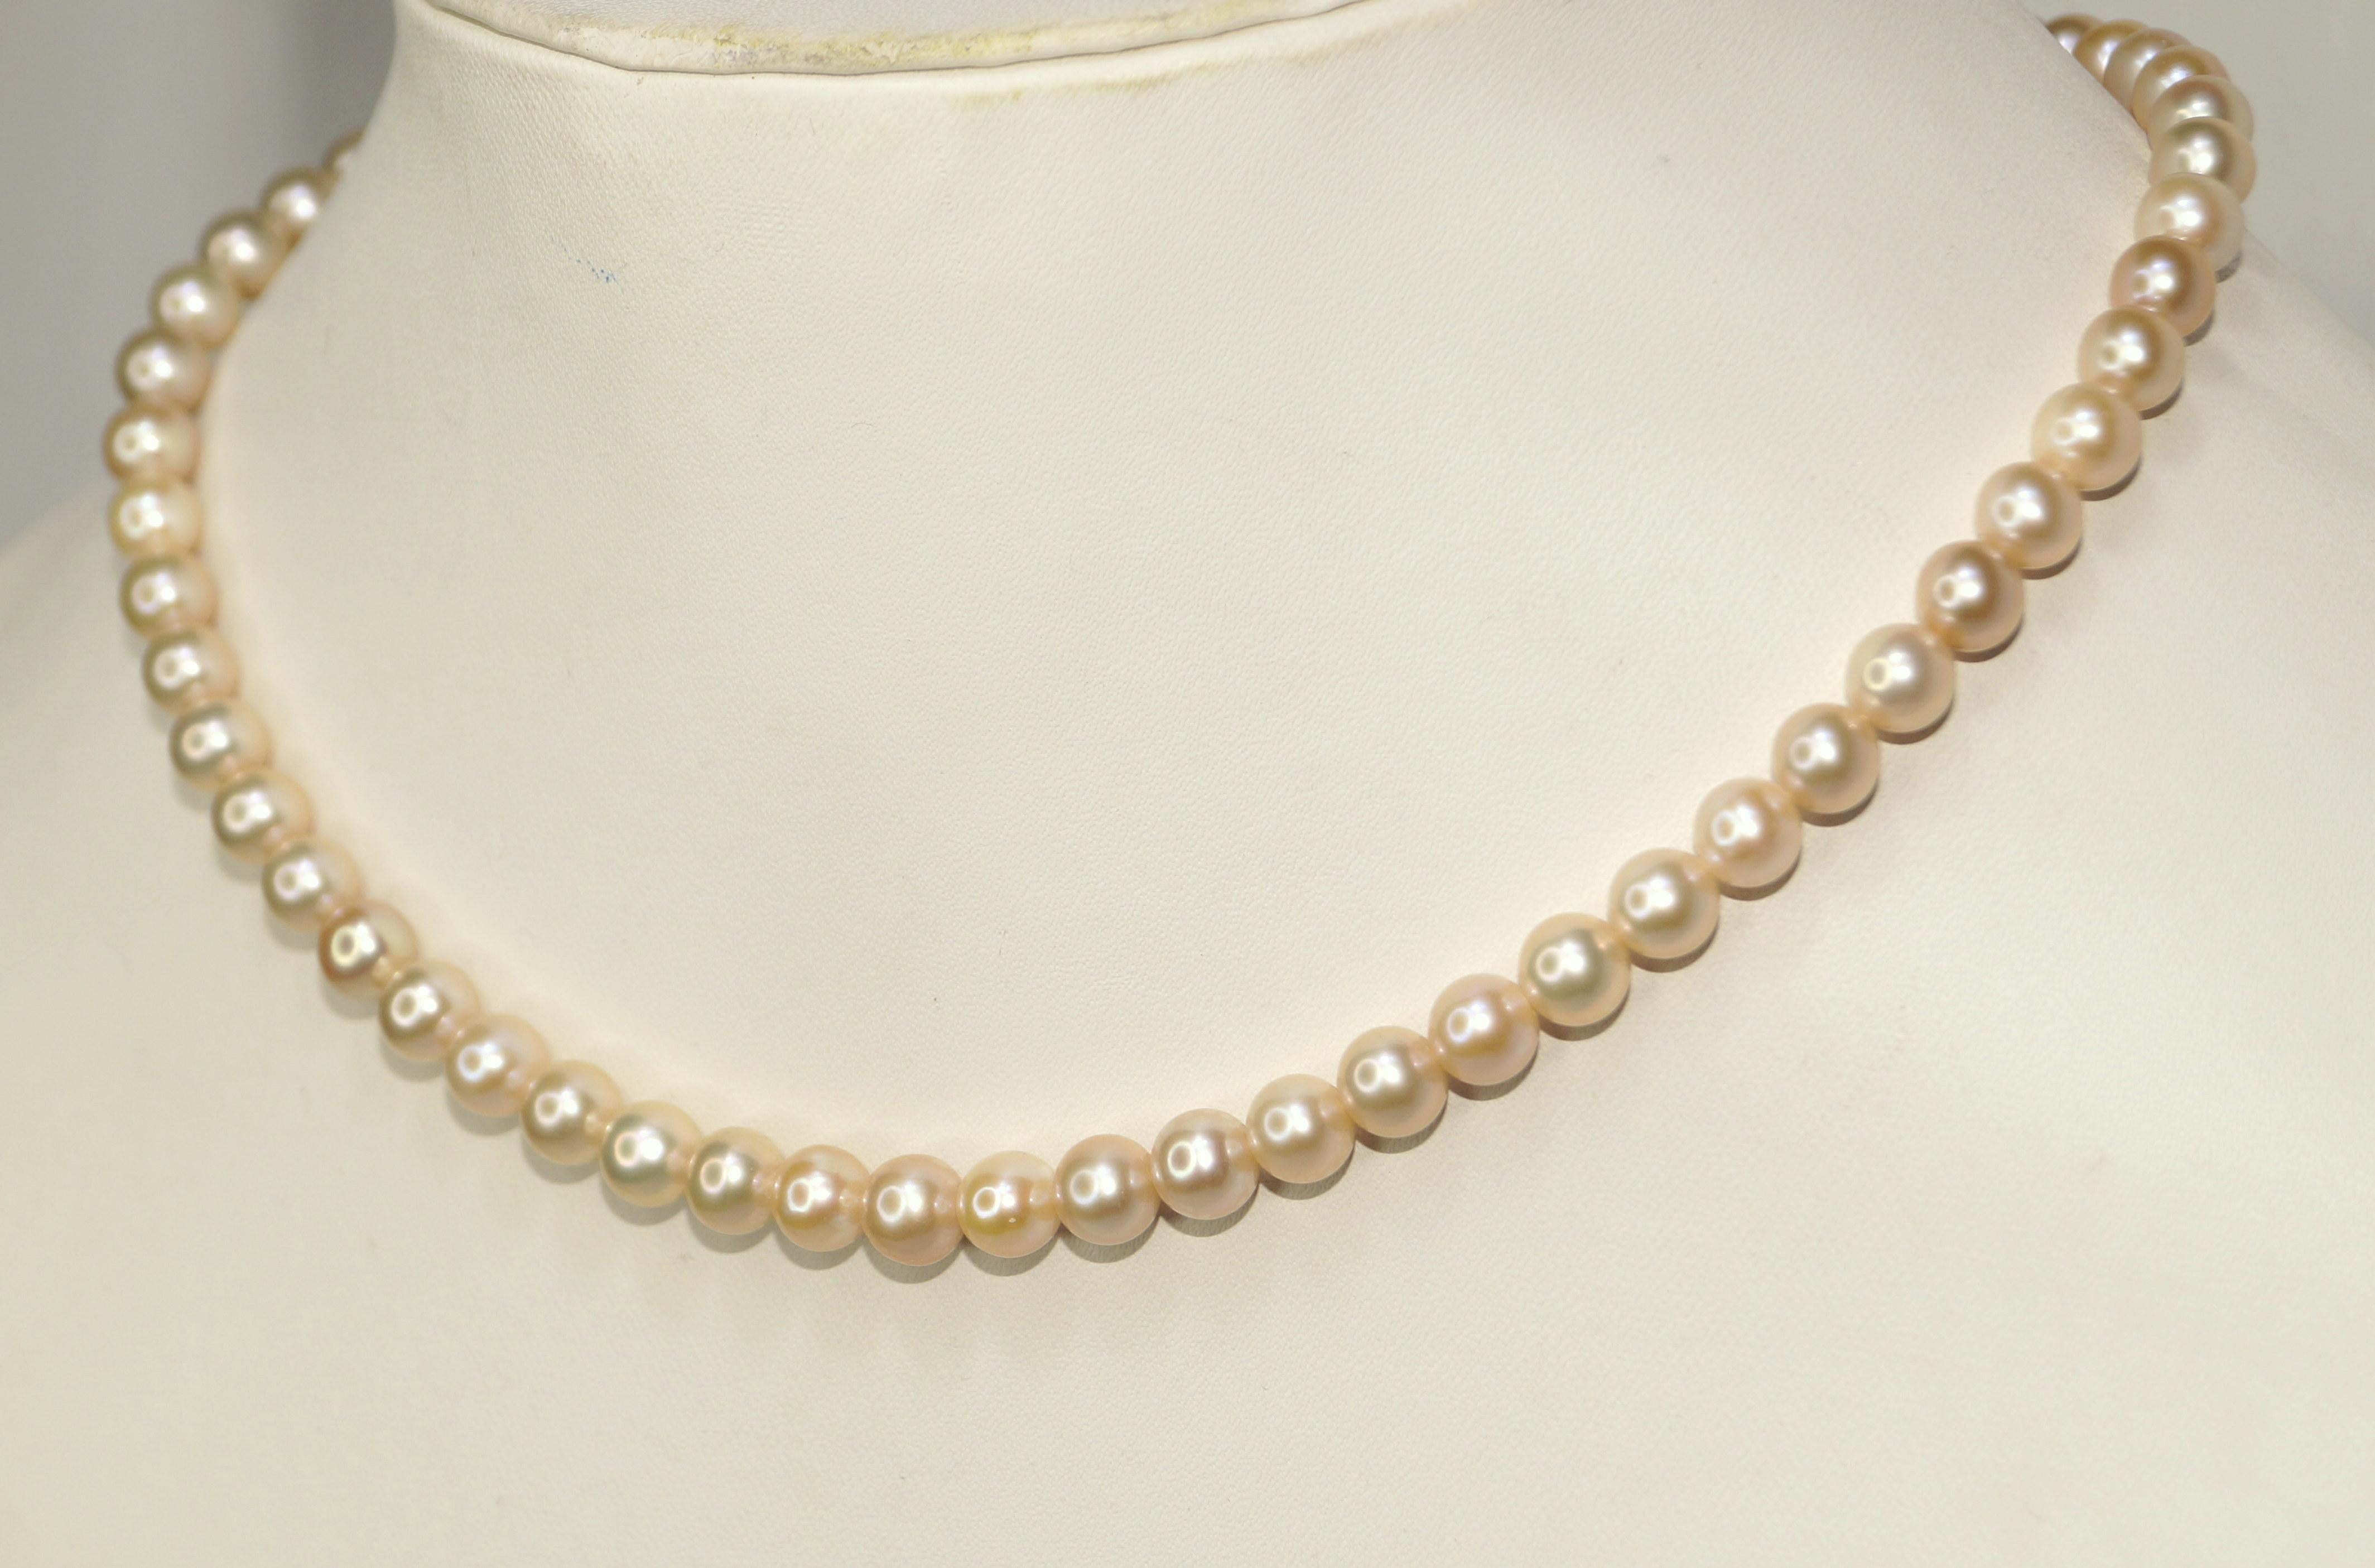 Details:
: 14k Yellow Gold Lock Freshwater pearl beads Necklace.

: Item no- KM26/1001/9884

:Pearl Size: 7mm (Approx.)

:Necklace length: 16